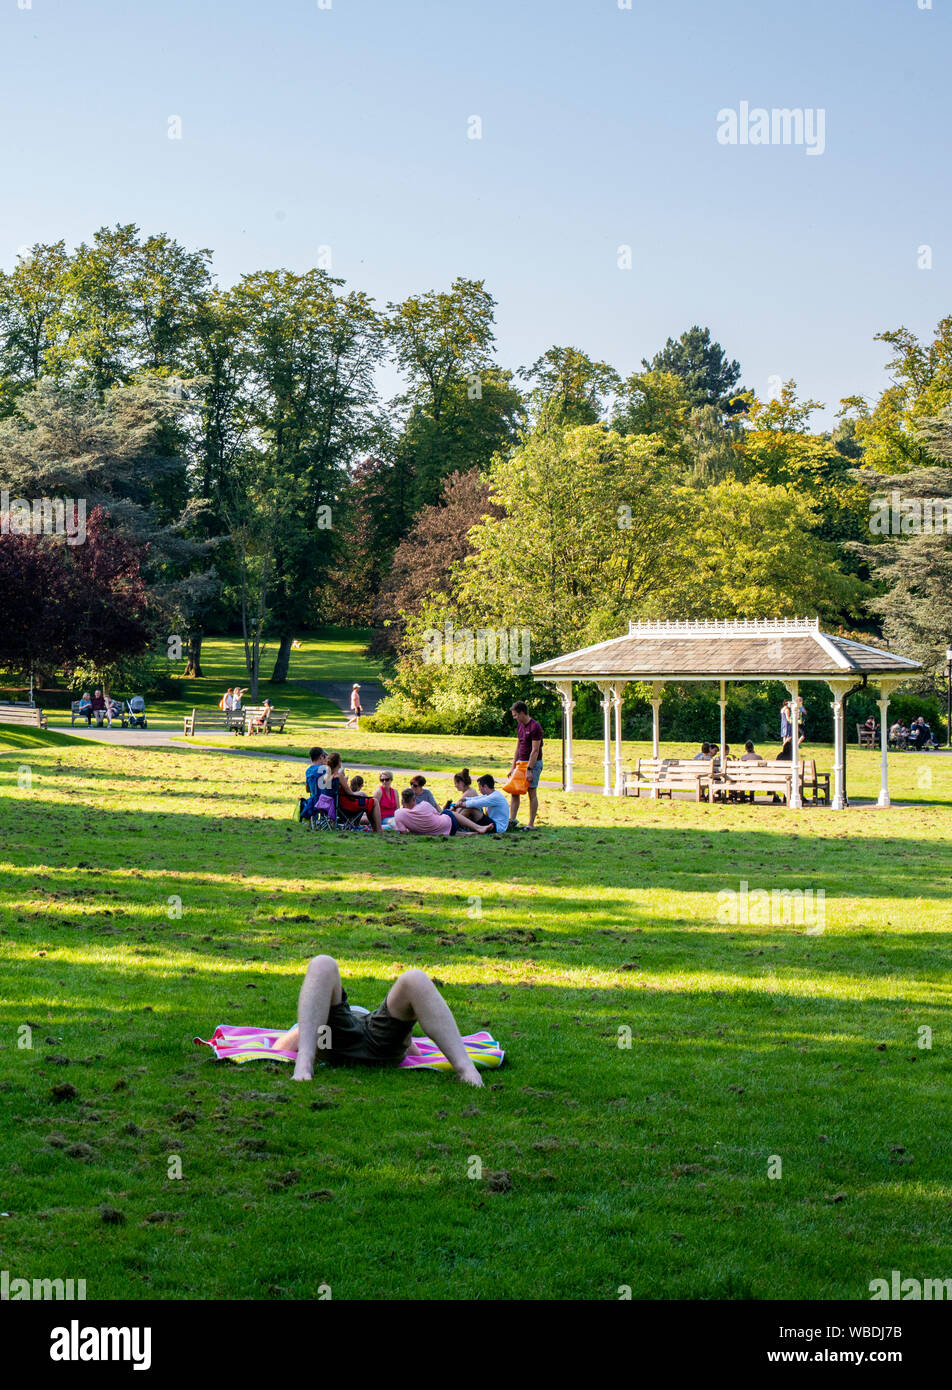 People relaxing on grass in park on very hot weather, Bank Holiday Monday, Valley Gardens, Harrogate, UK, 26 August 2019 Stock Photo